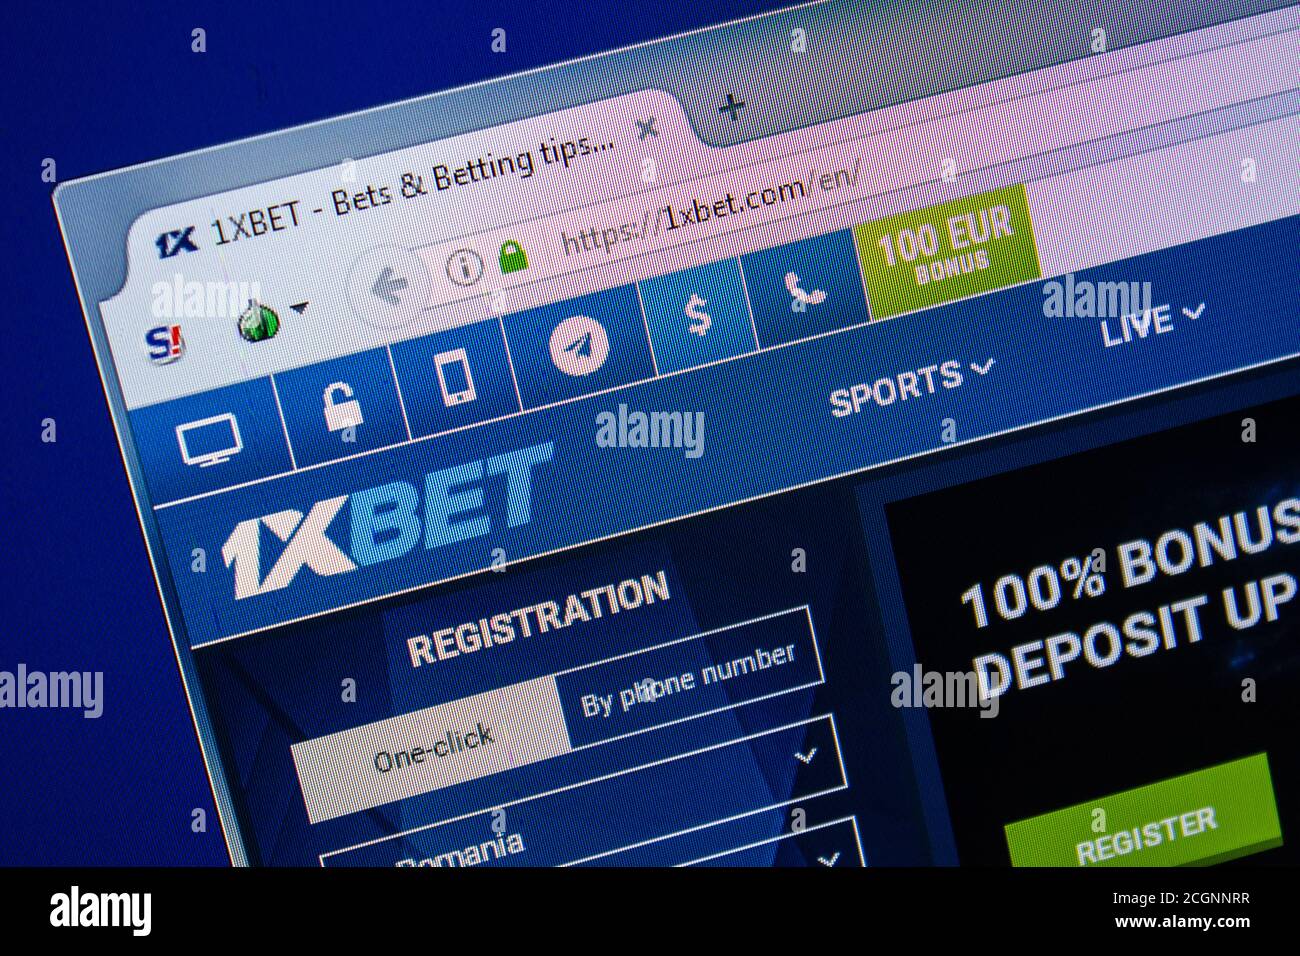 Super Easy Simple Ways The Pros Use To Promote 1 x bet